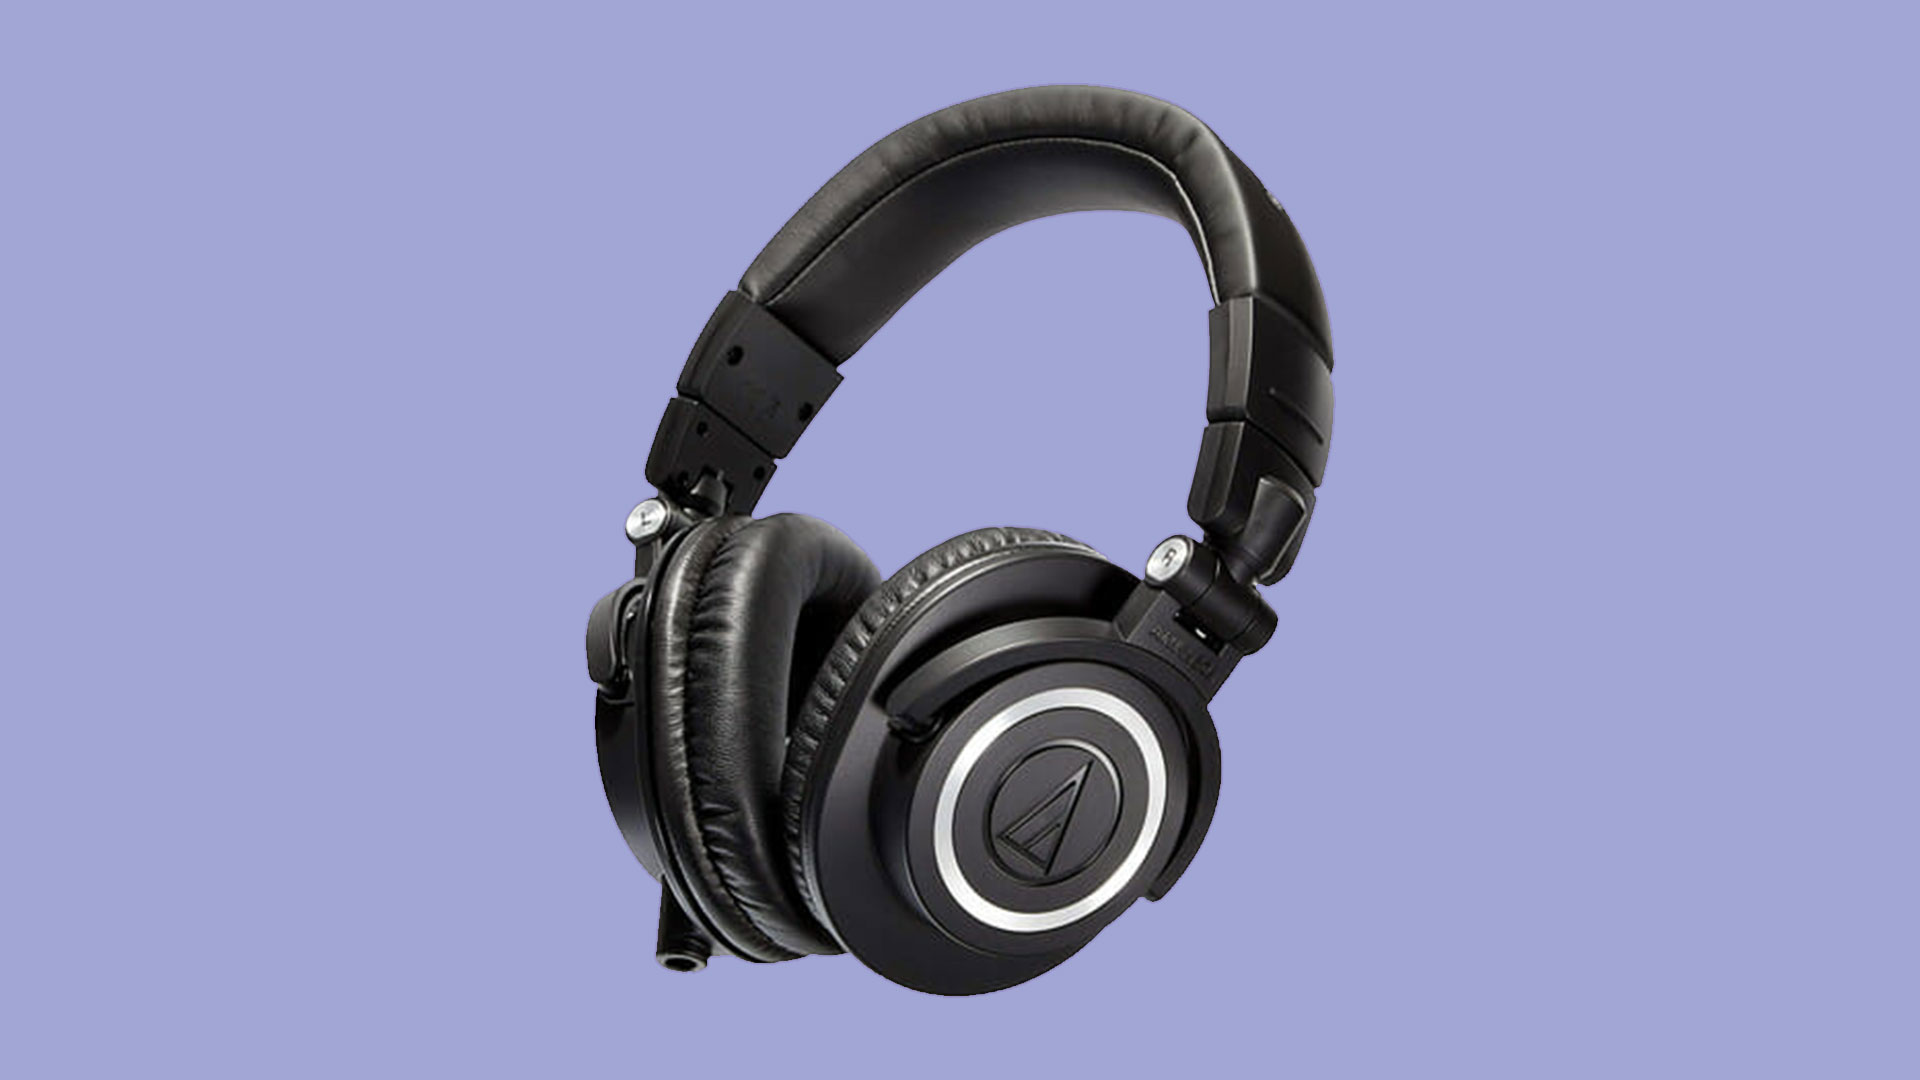 The Audio Technica ATH-m50x is a good pair of headphones for podcasting, mixing, and listening to music.